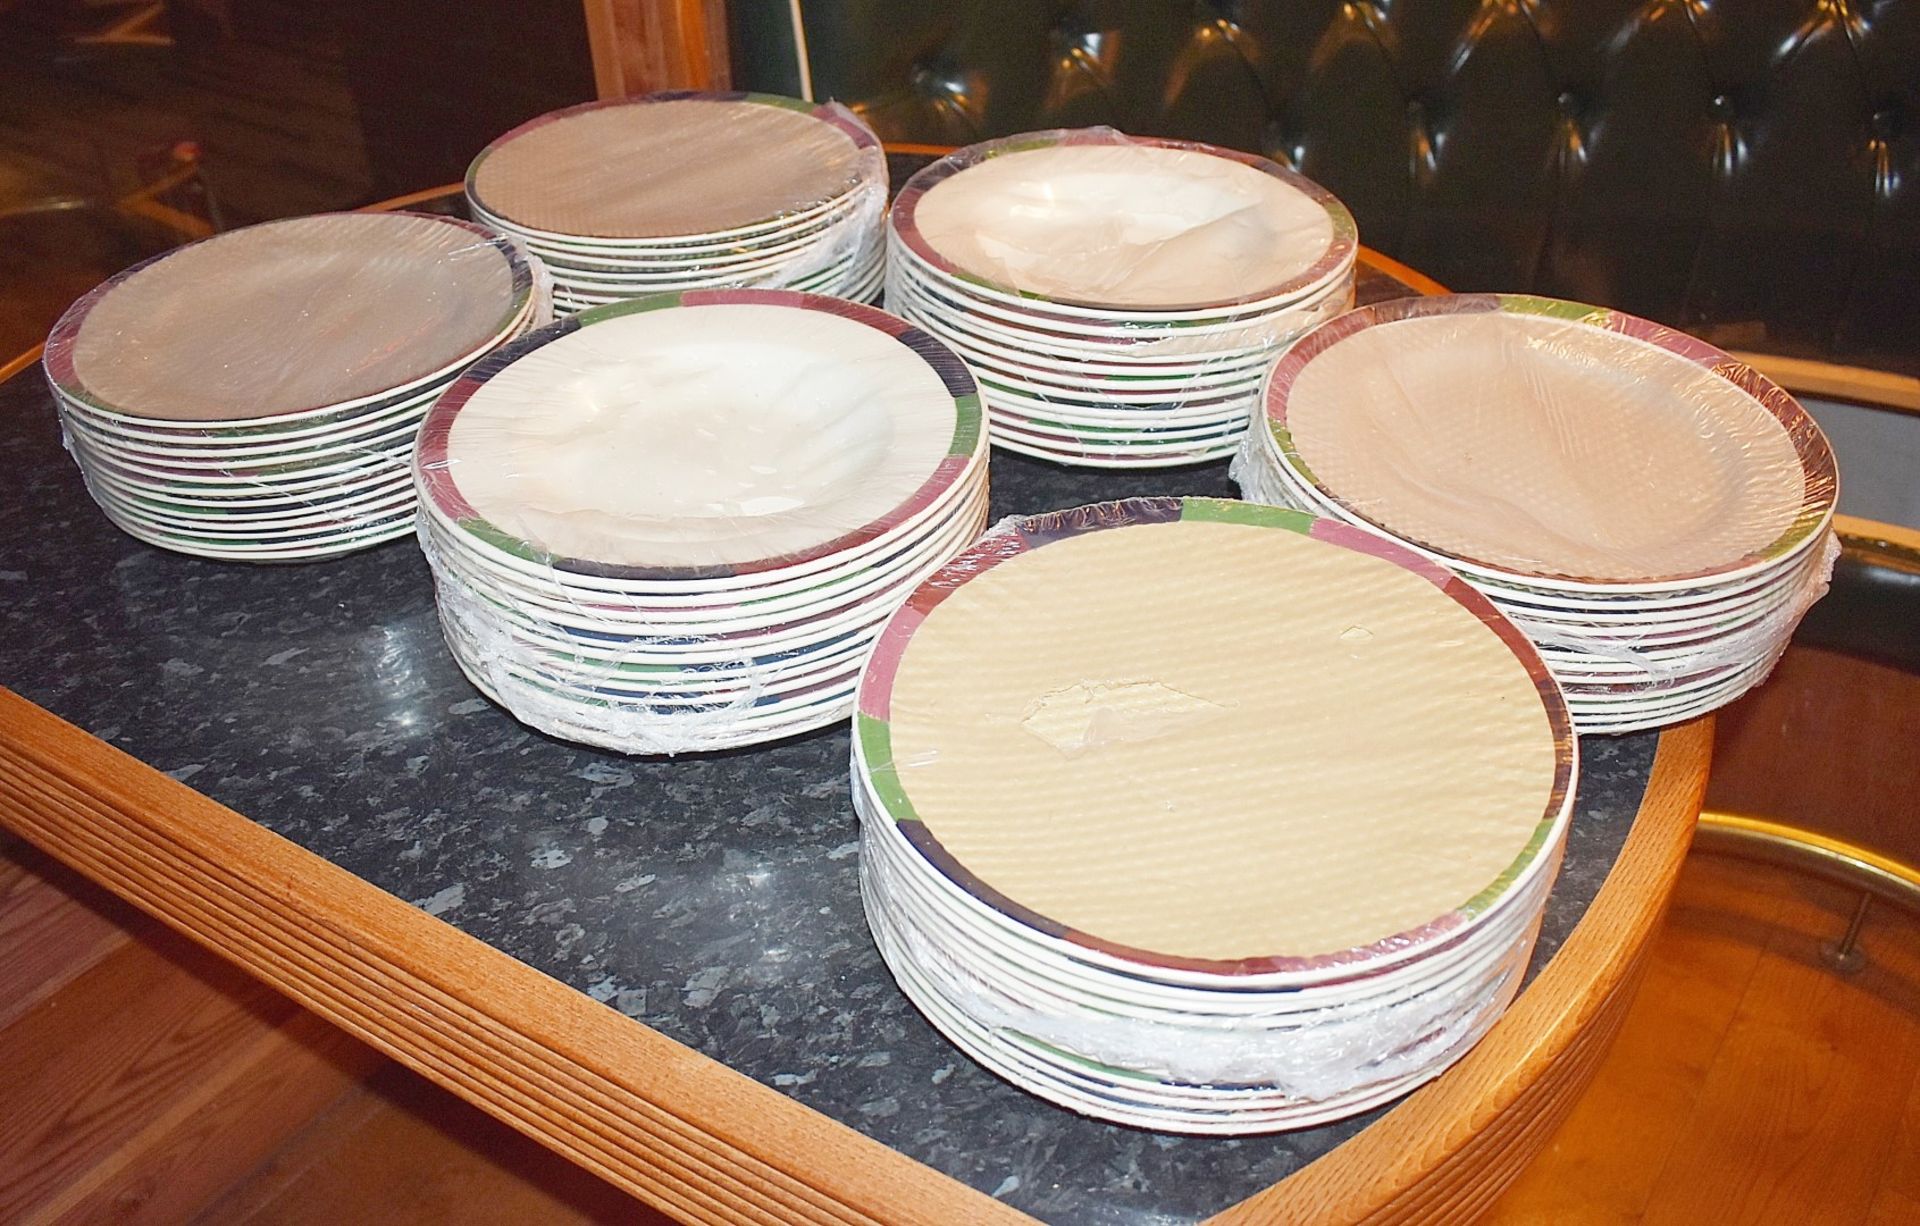 1 x Large Assortment Of Commercial Restaurant Tableware Including Plates, Bowls And Glasses - Image 6 of 7